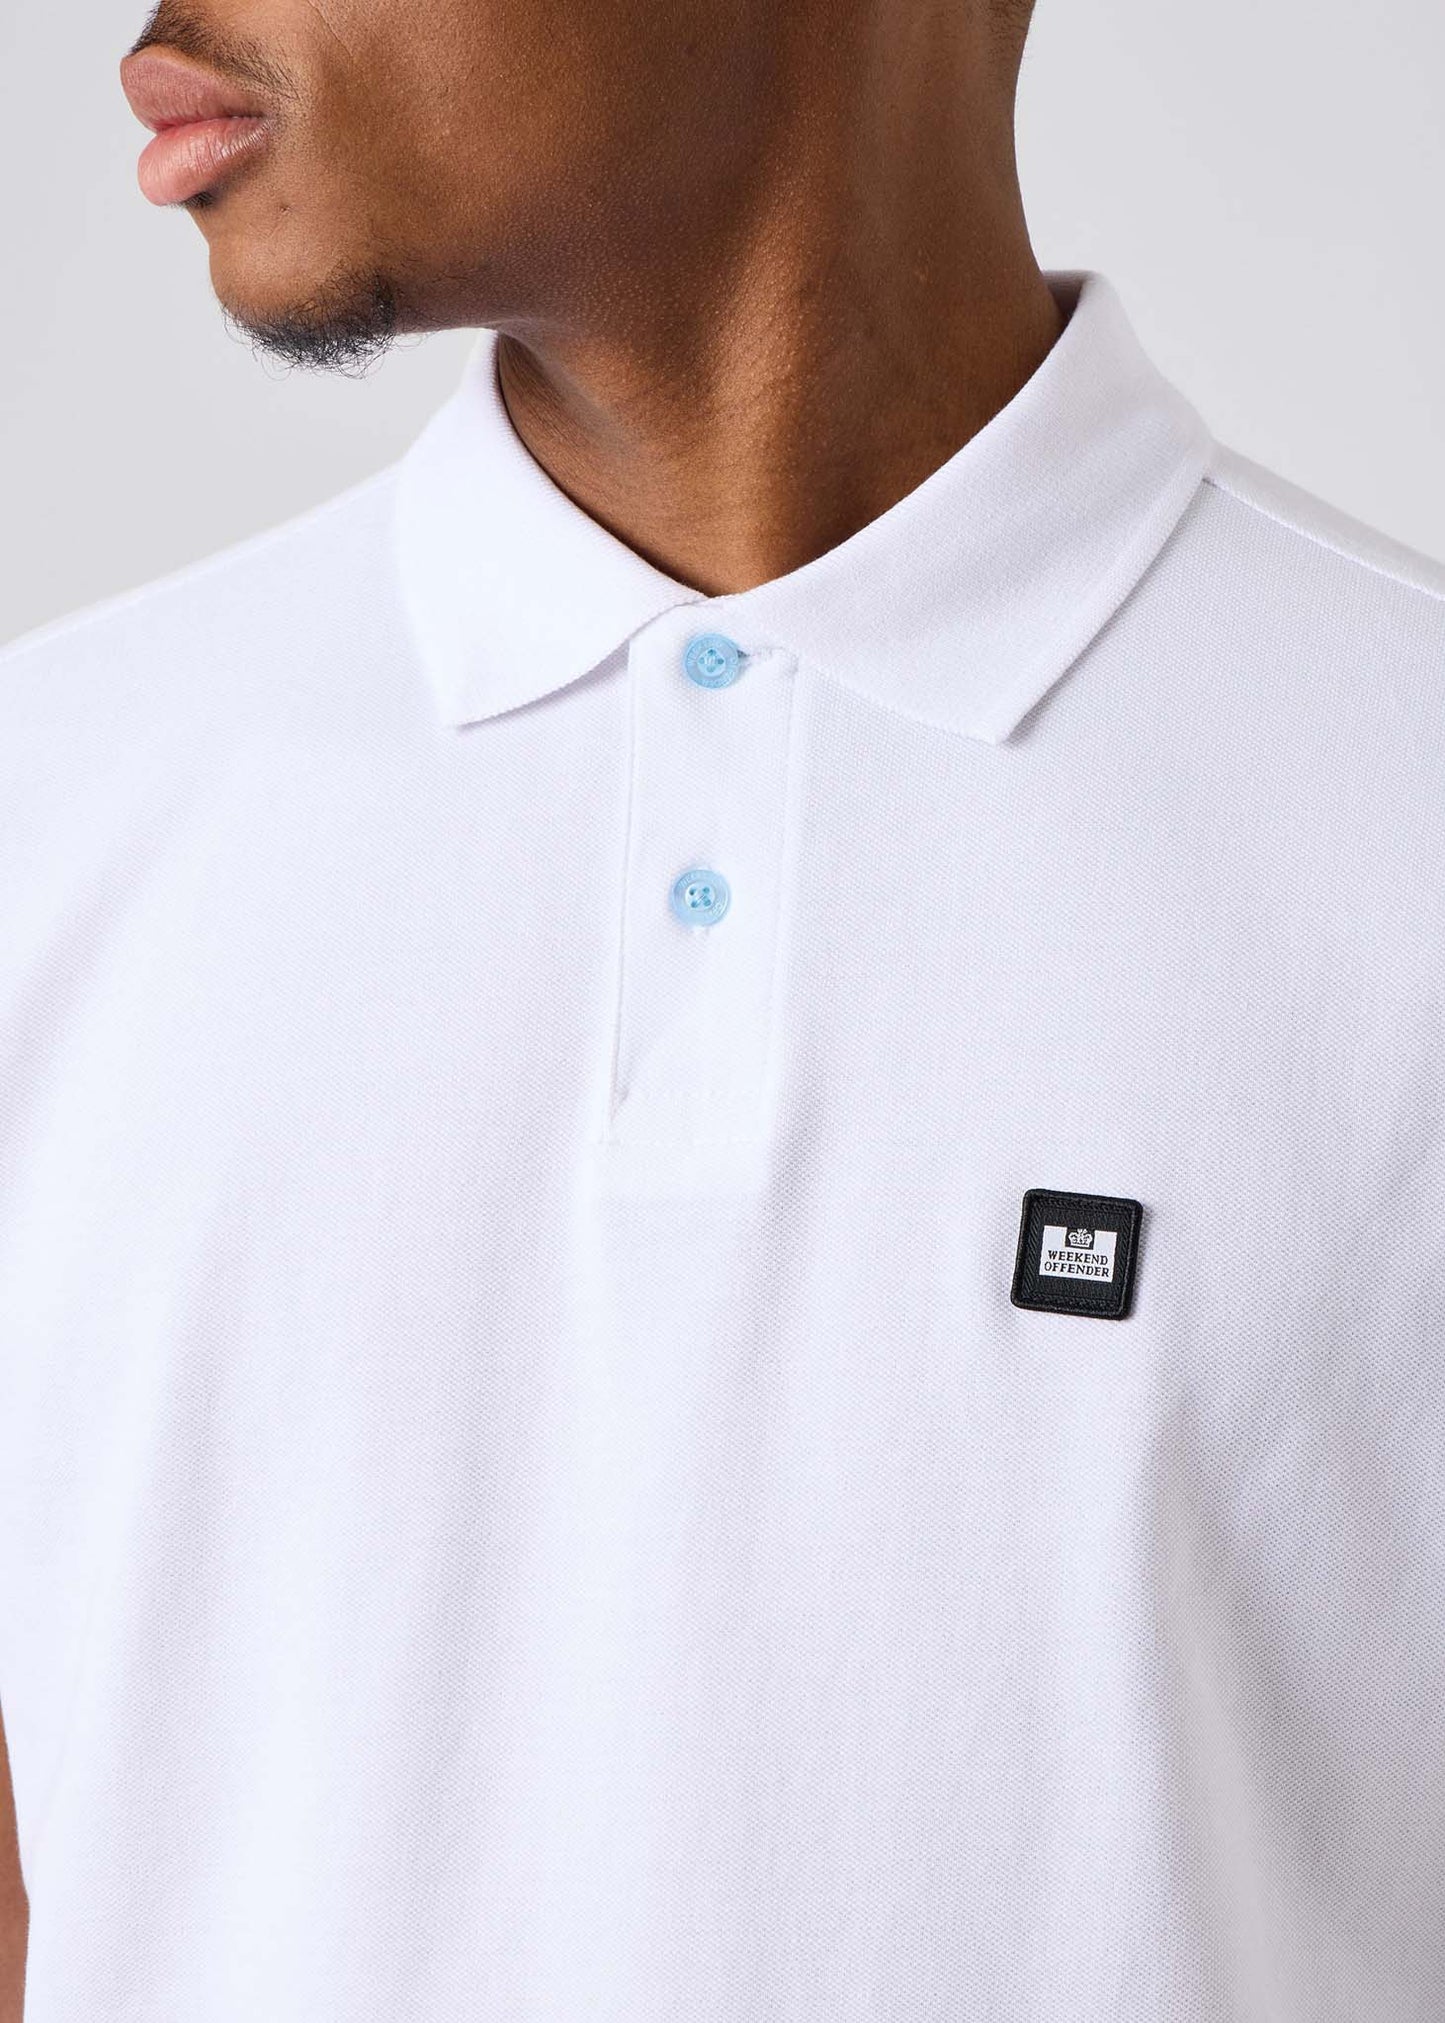 Weekend Offender polo white